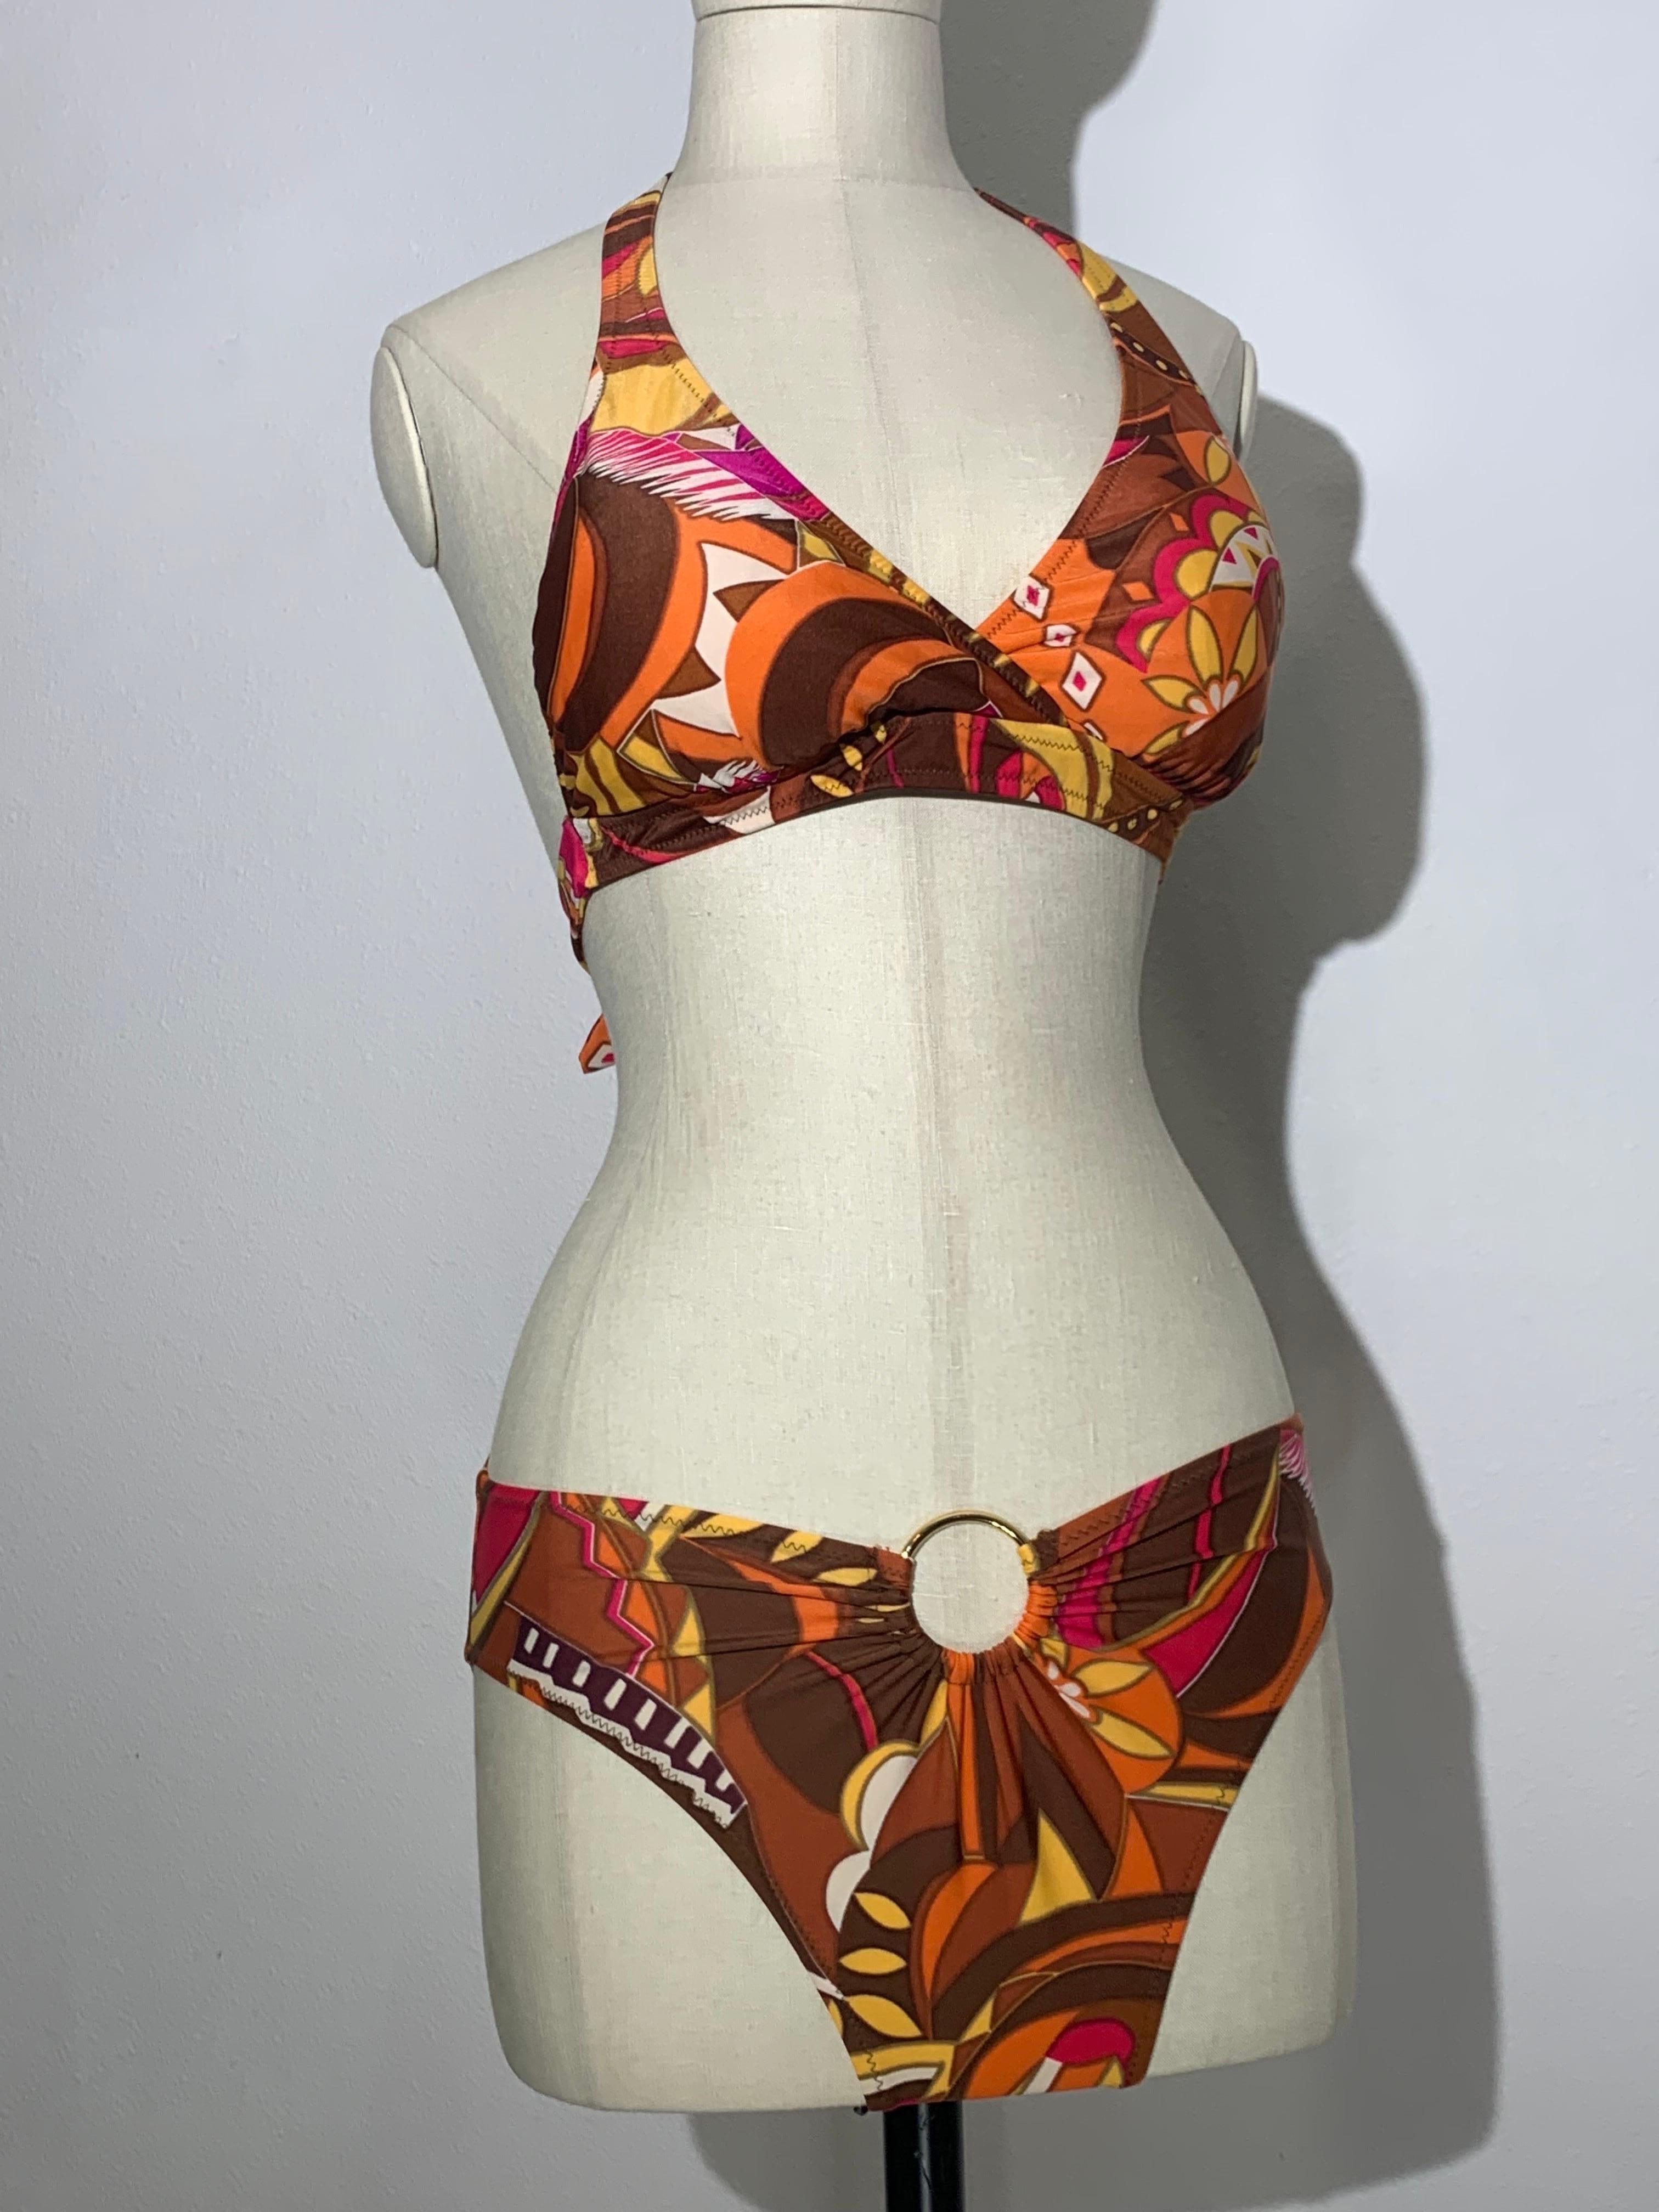 1970s Gottex Stylized Floral 2-Piece Bikini Swimsuit in Brown Copper and Orange For Sale 11